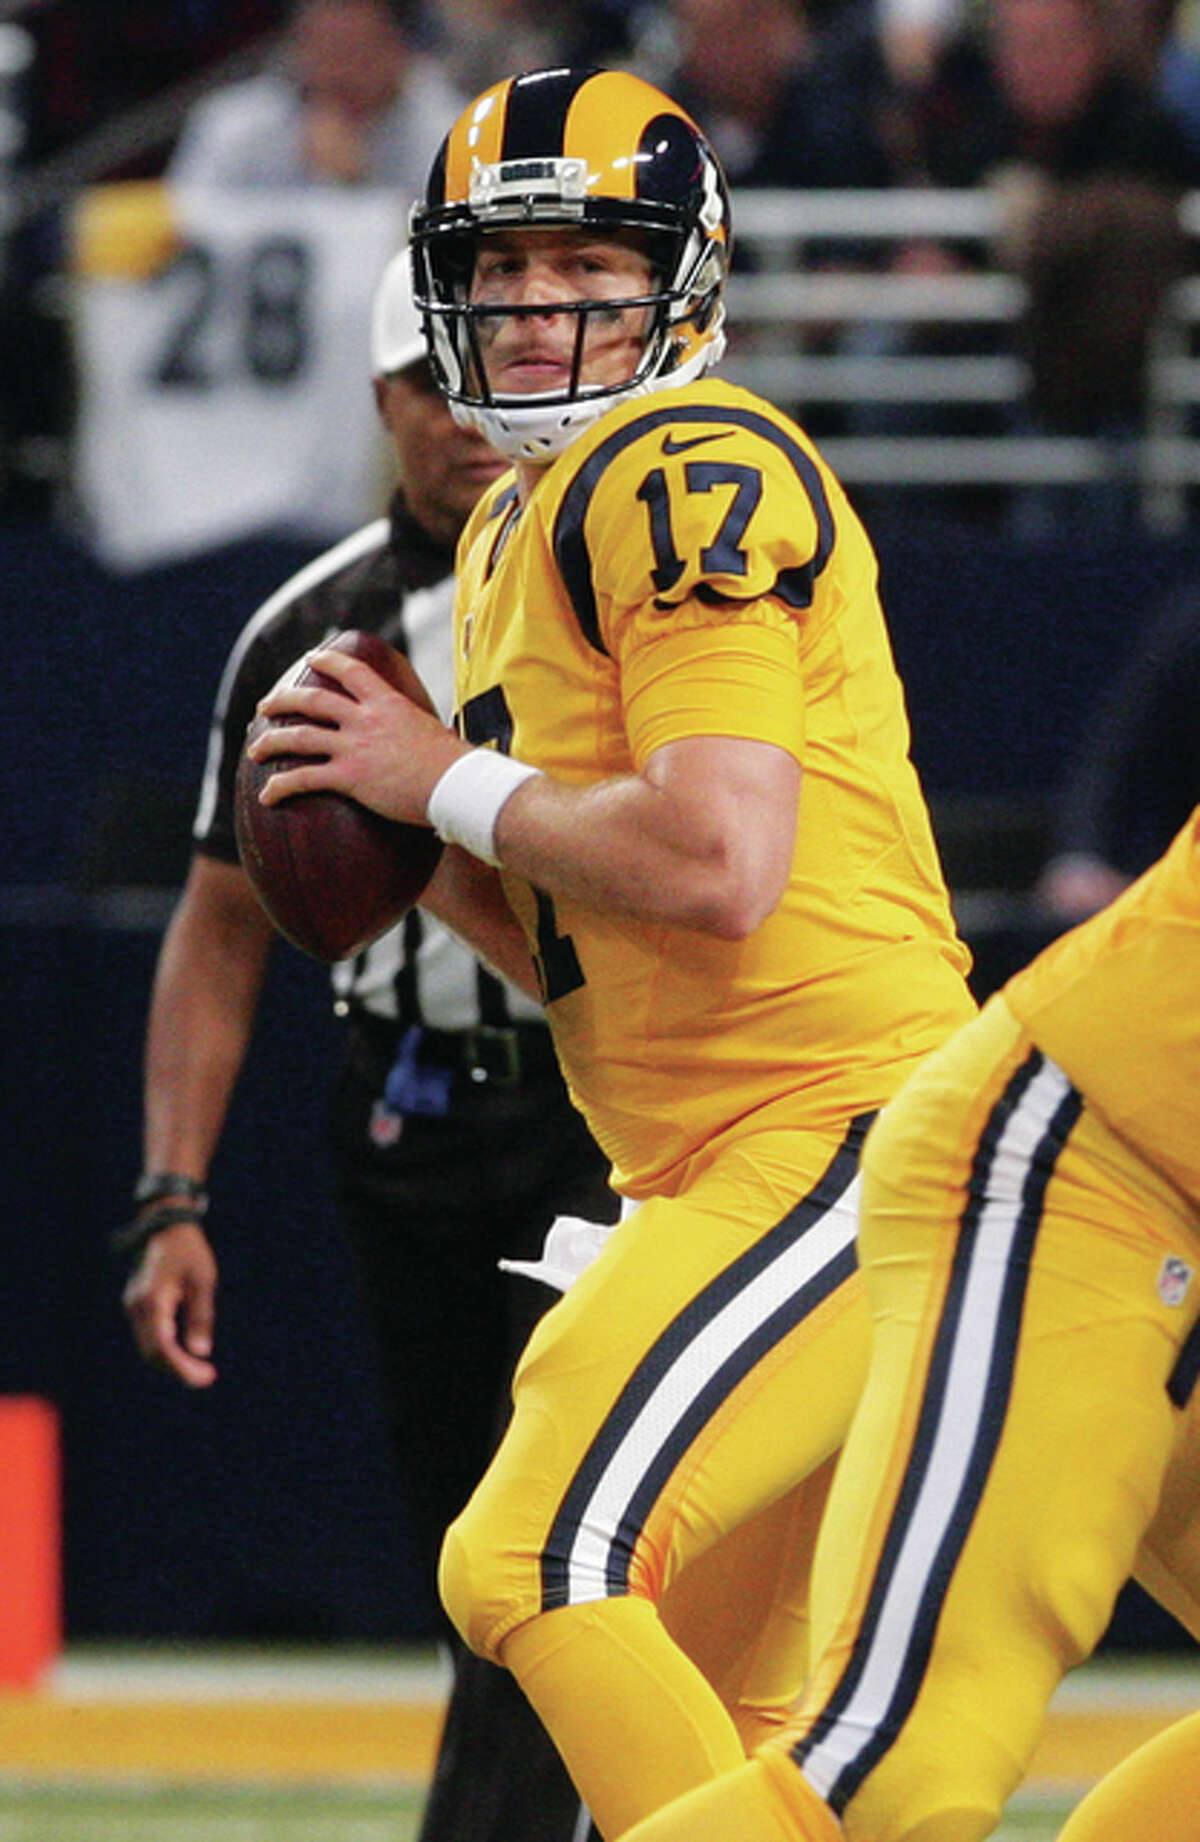 Rams quarterback Case Keenum looks to throw during Thursday night’s win over the Tampa Bay Buccaneers at the Edward Jones Dome in St. Louis.